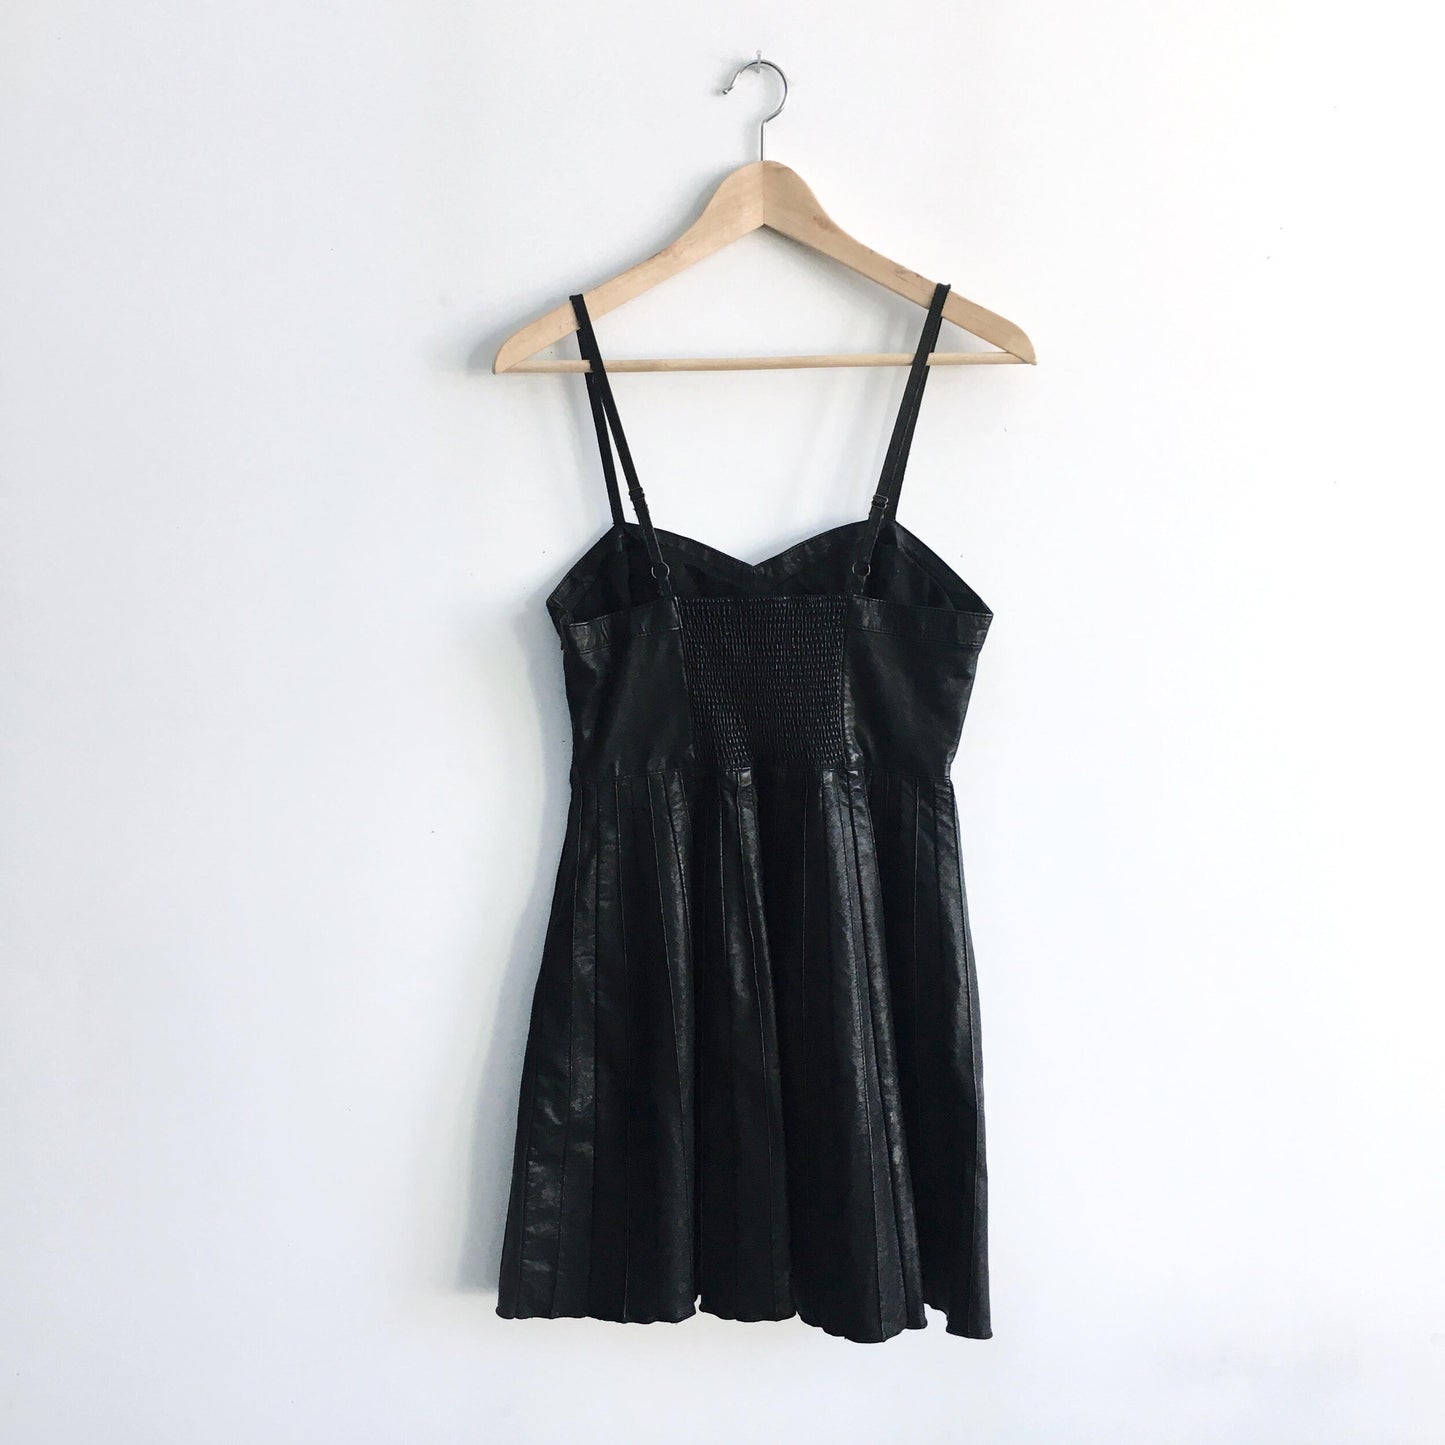 Free People vegan leather pleated dress - size Small